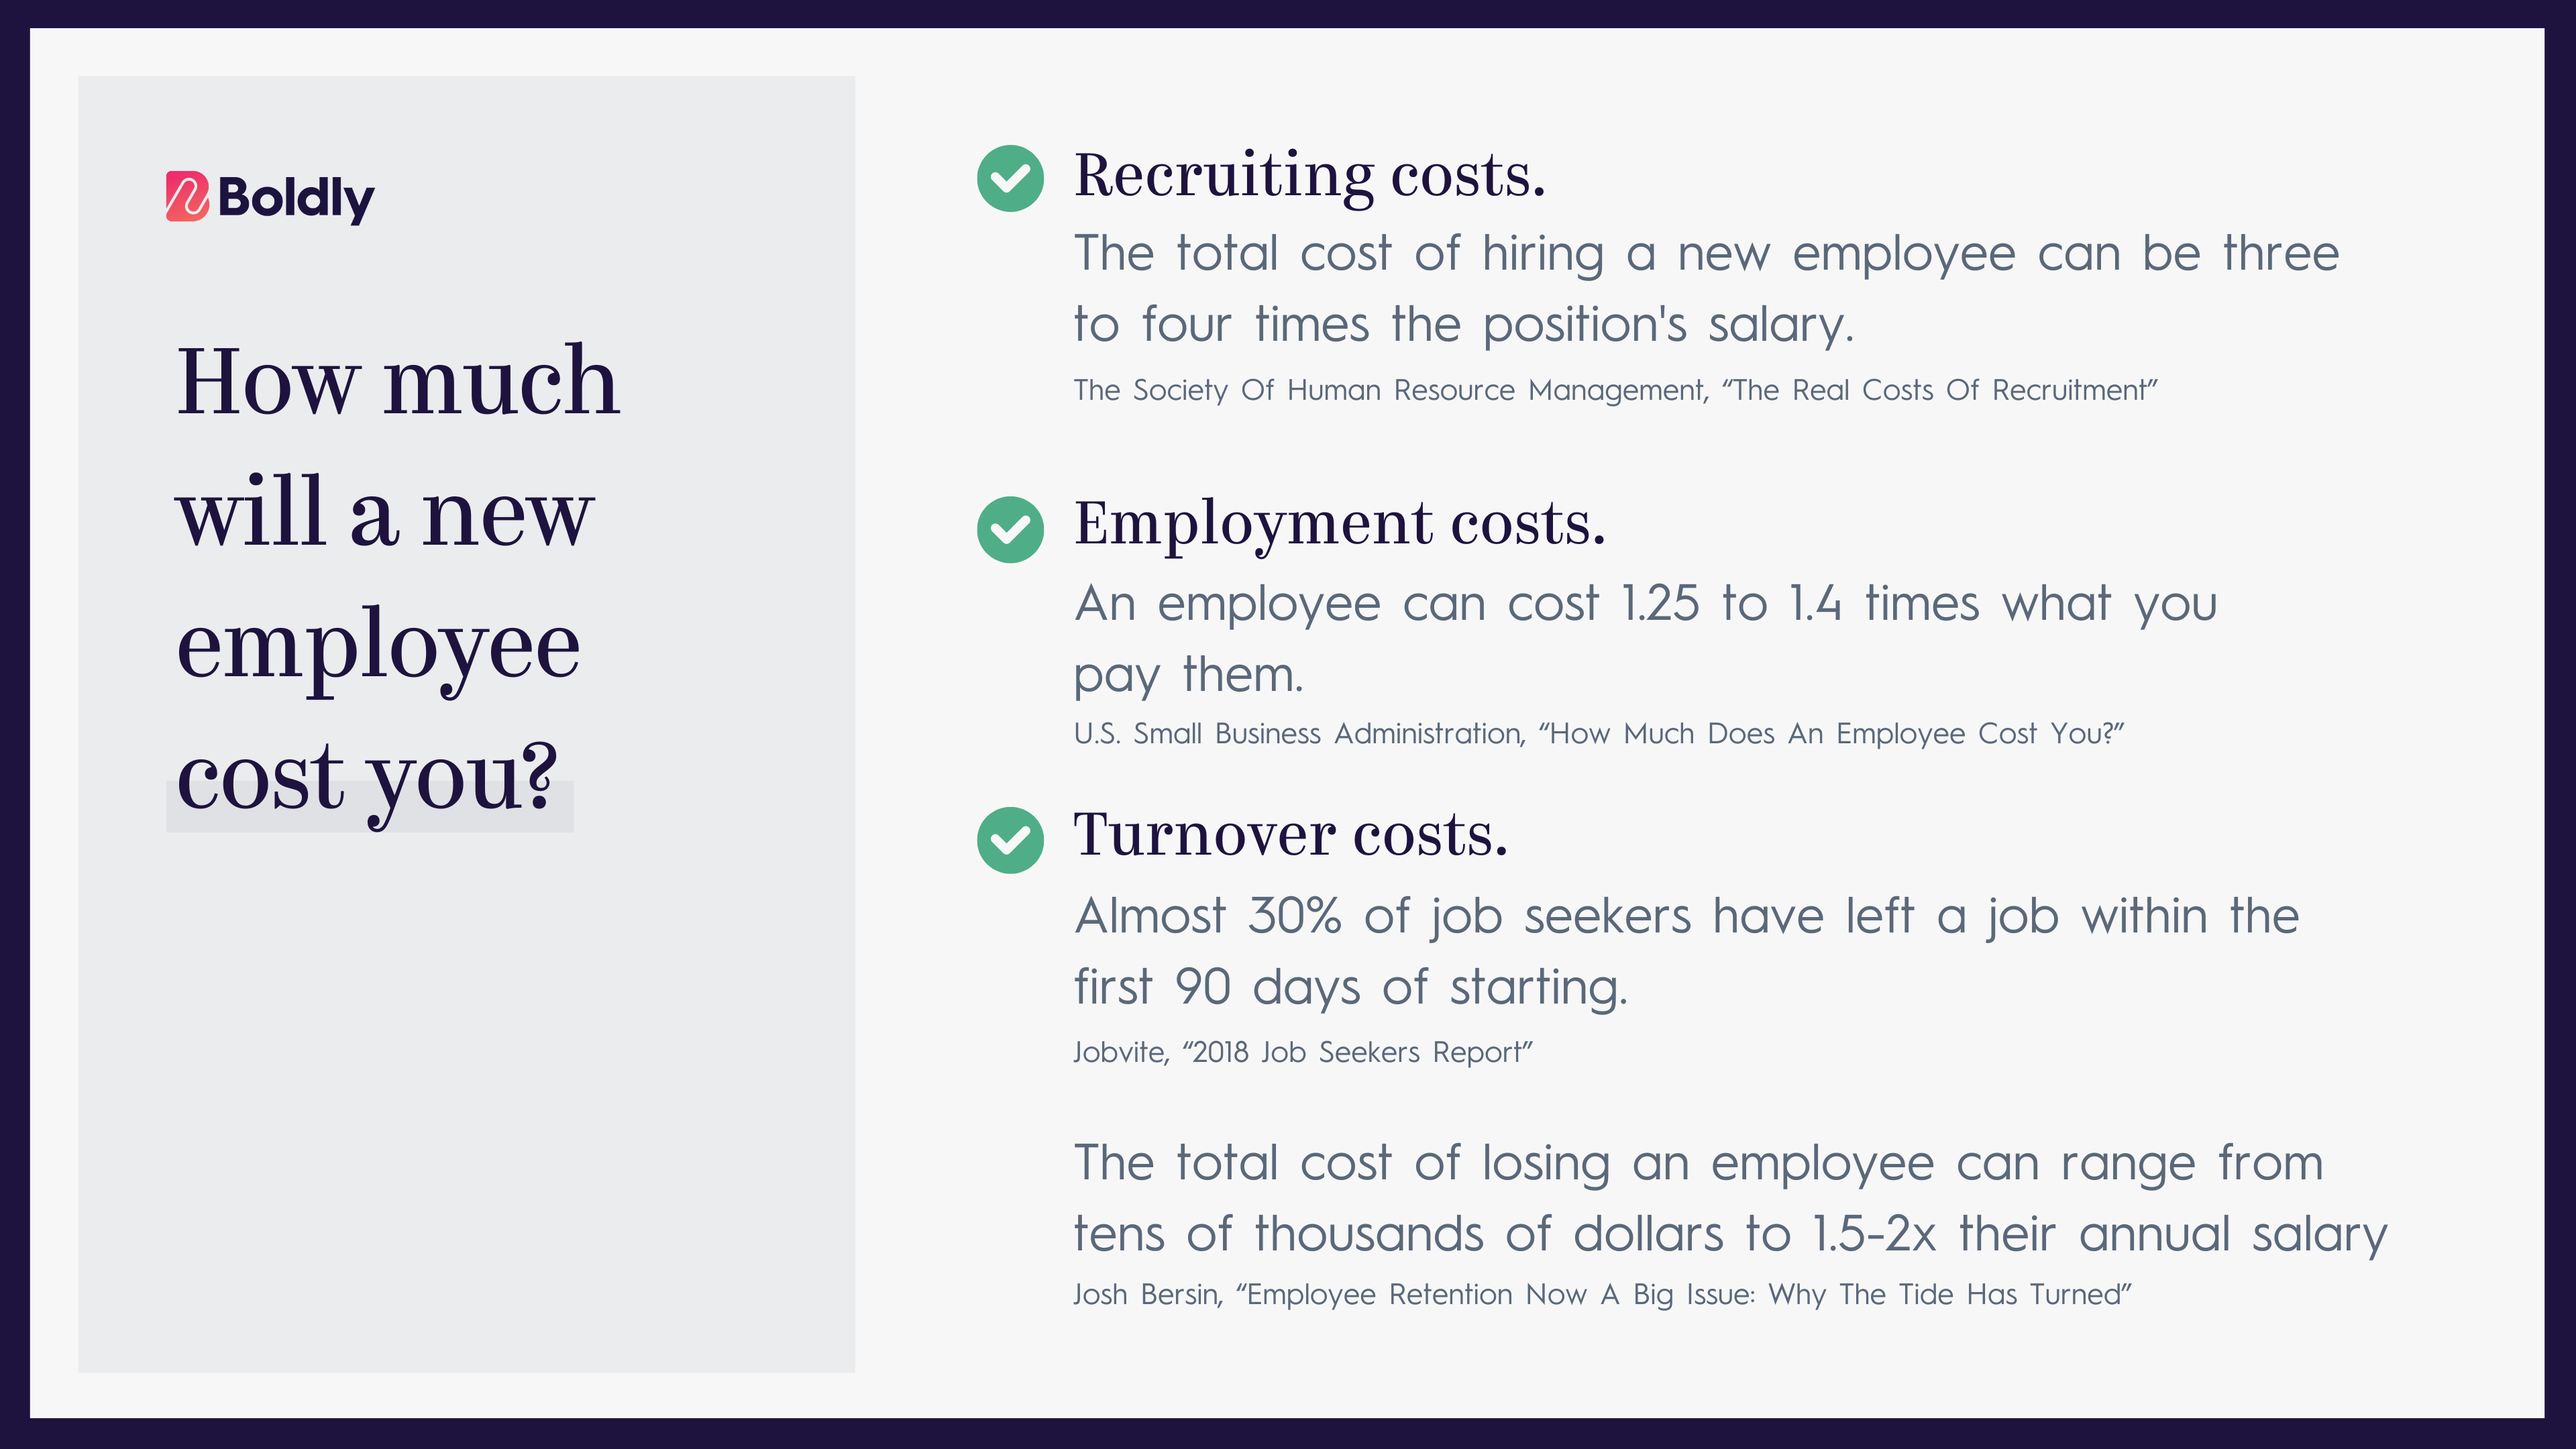 Chart showing the Key Statistics on Recruiting & Hiring Costs